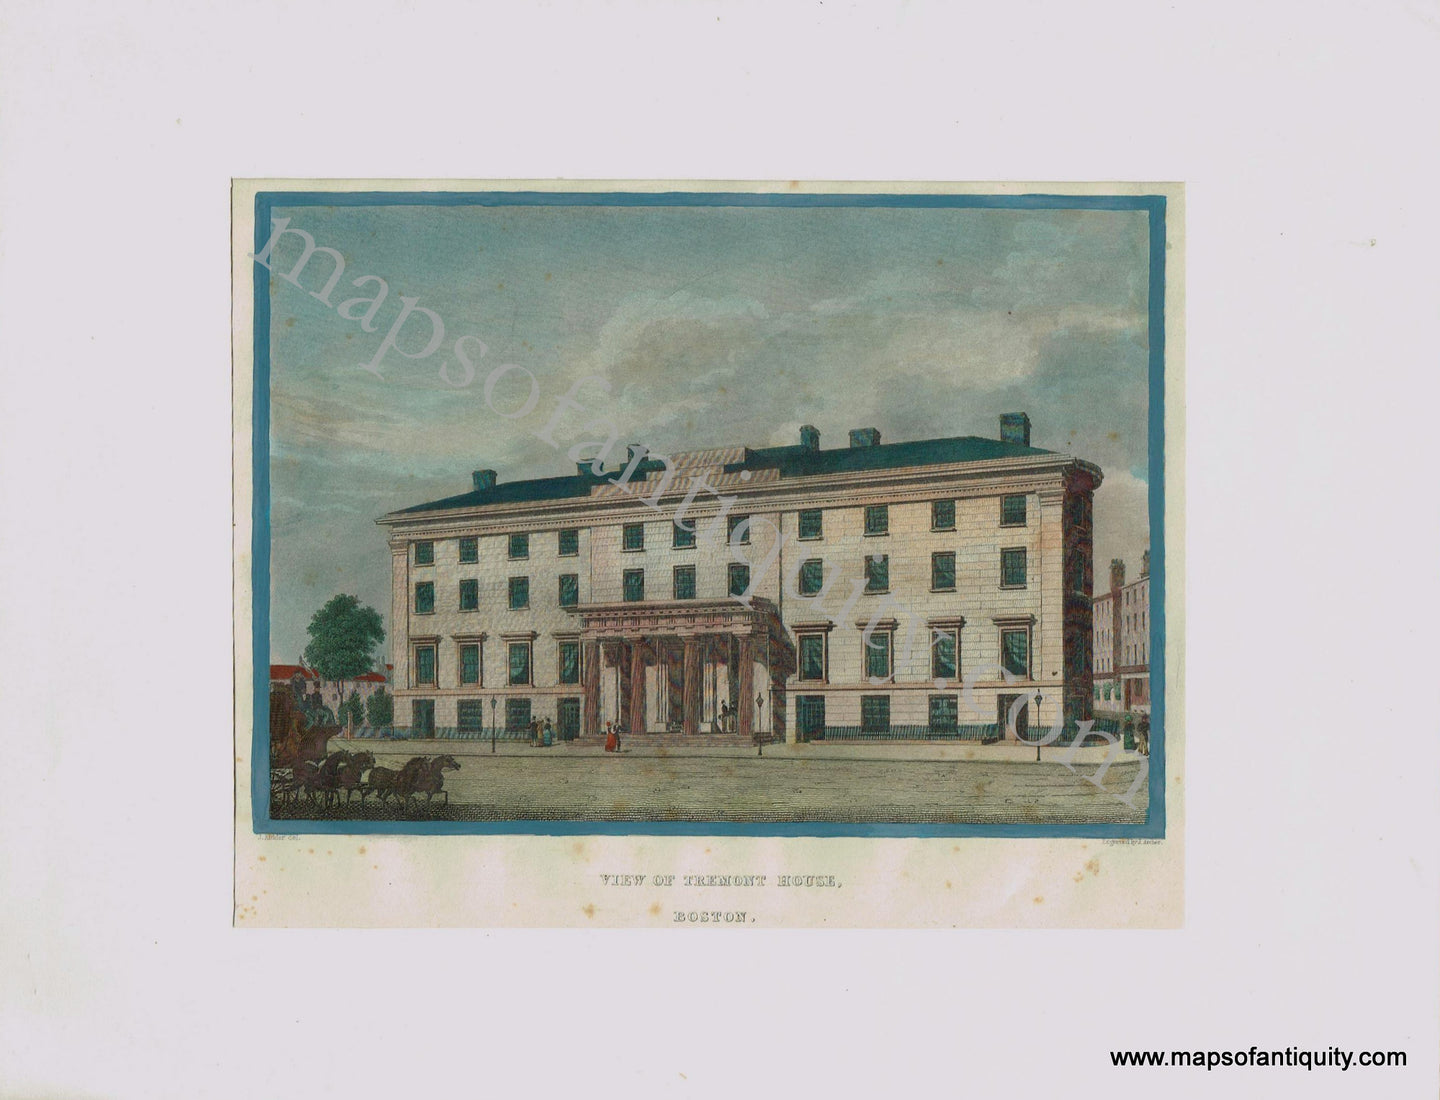 Antique-Print-Prints-Illustration-Engraved-Illustrations-Engraving-View-of-Tremont-House-Boston-Hotel-History-Mass.-Mass-Massachusetts-MA-City-Cities-Kidder-Archer-1834-1830s-1800s-Early-Mid-19th-Century-Maps-of-Antiquity